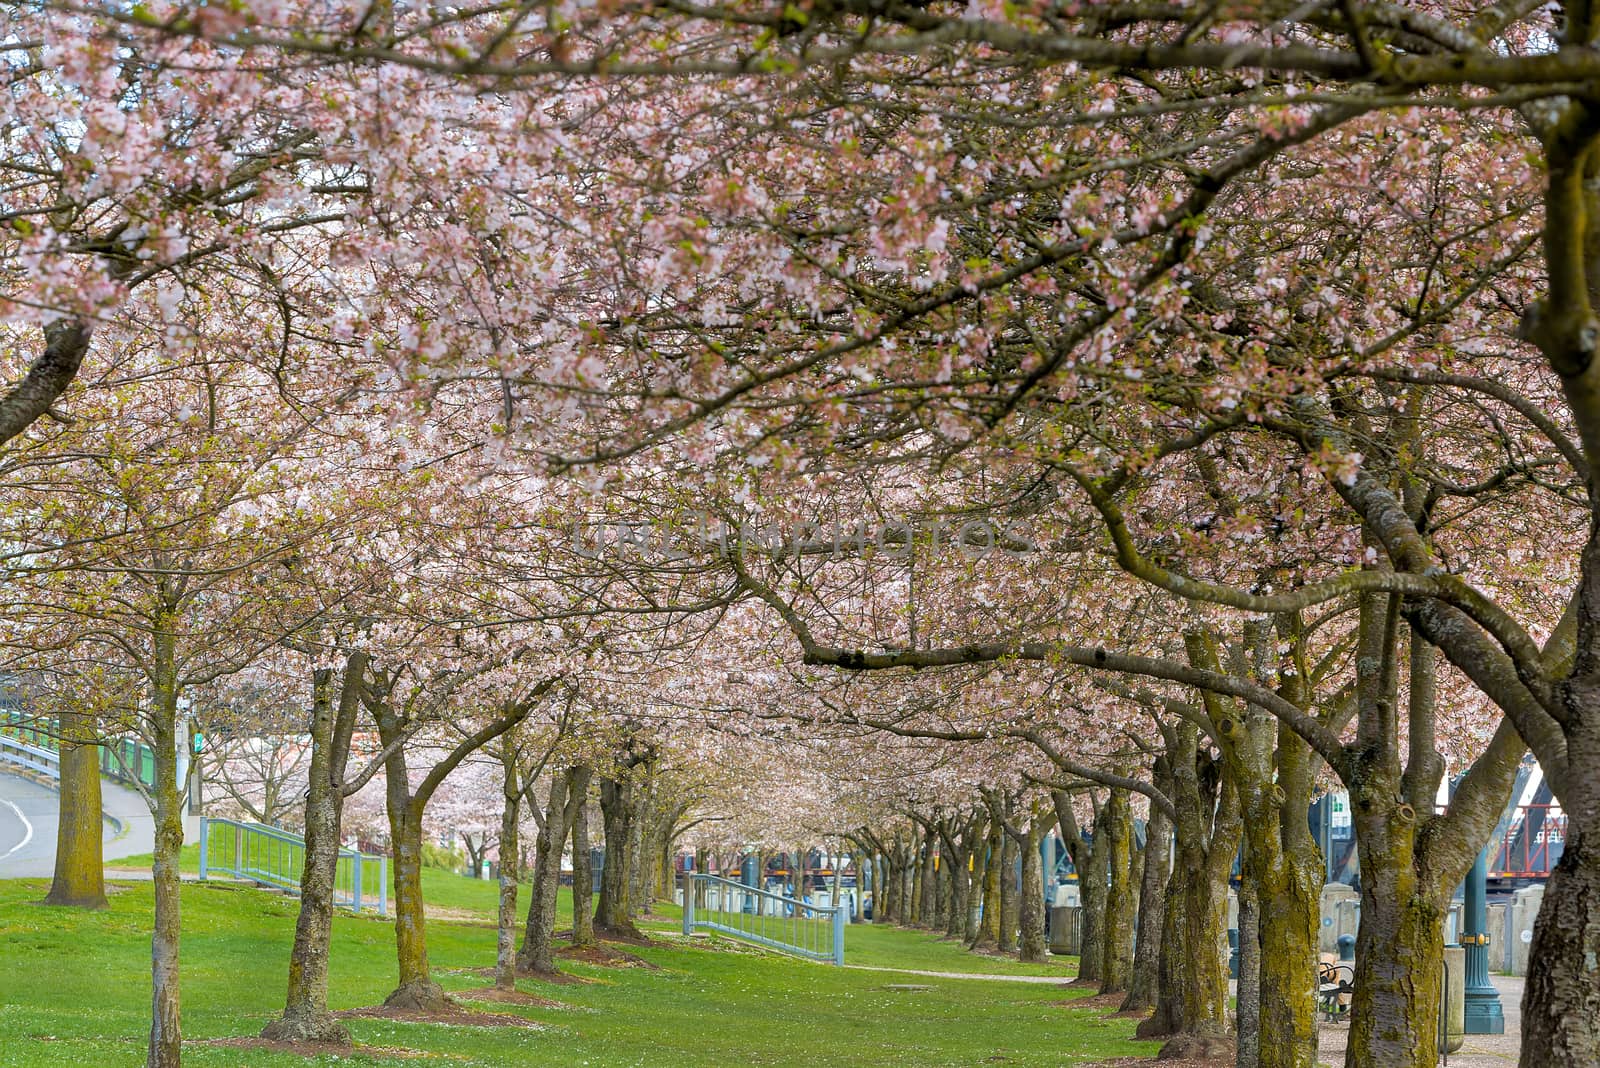 Rows of Cherry Blossom trees along Portland Oregon downtown waterfront park in Spring season